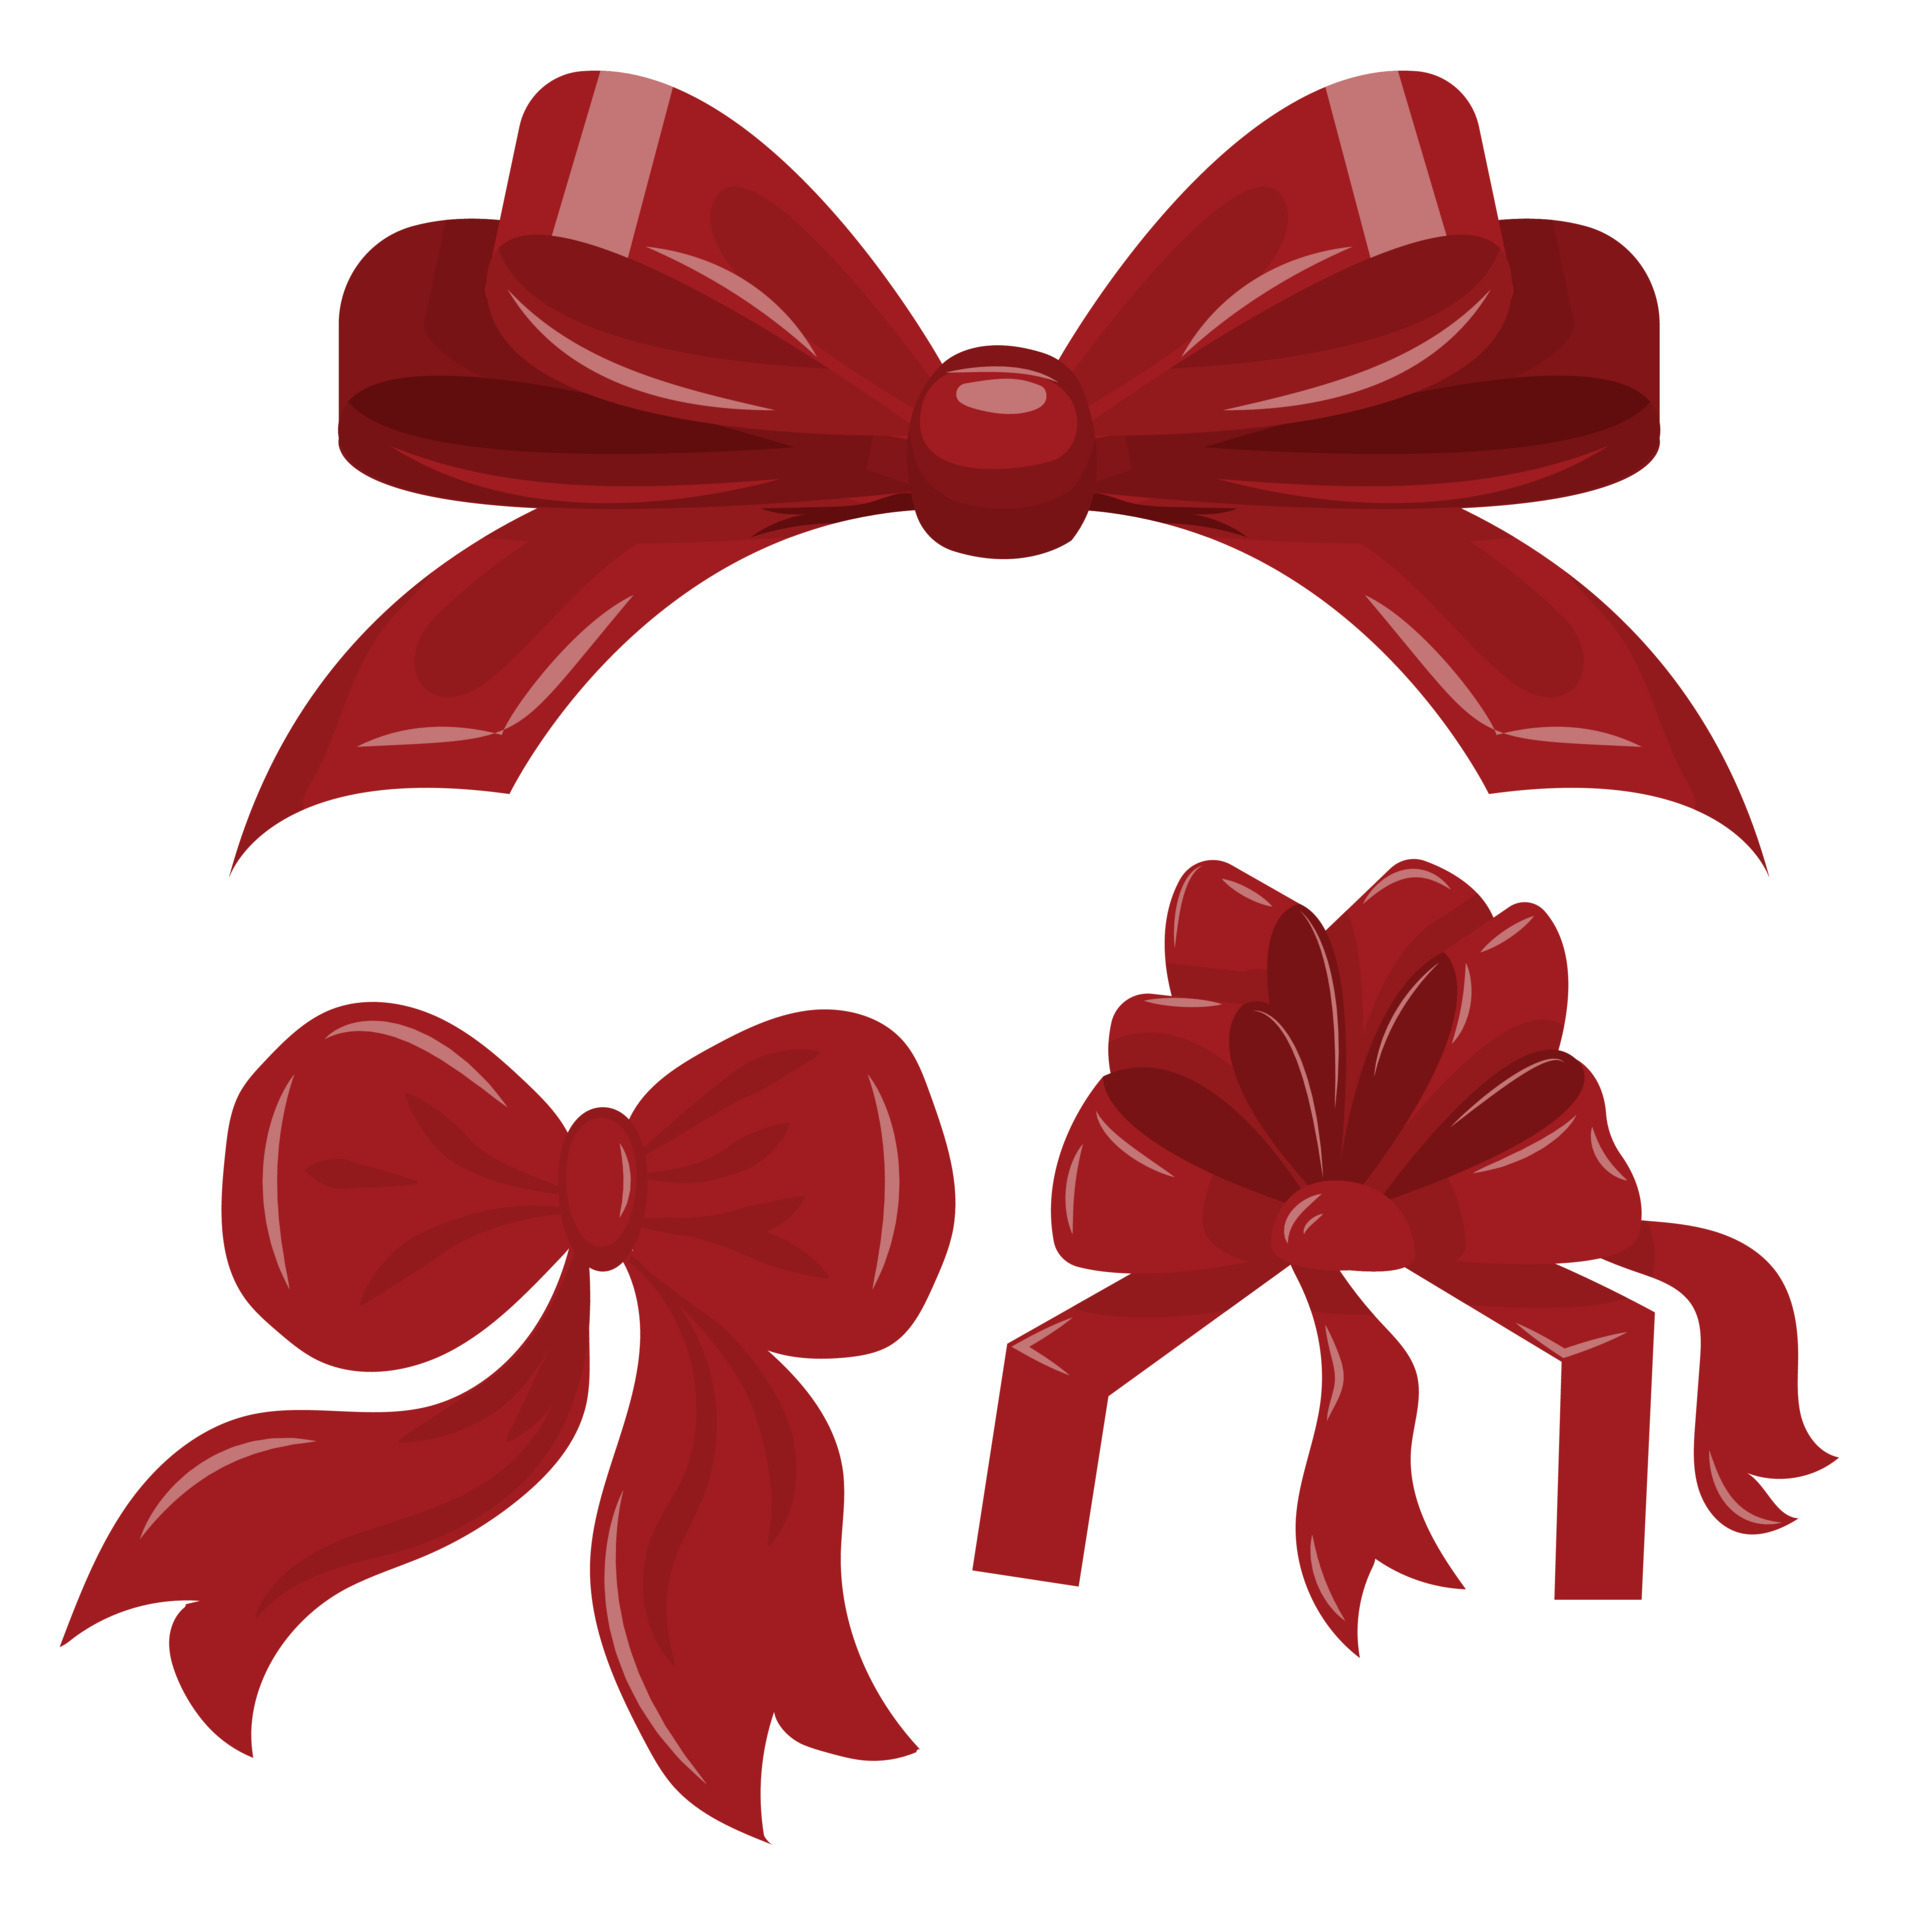 Valentines Bow Clipart Vector, Valentines Day Gift Box Bow Decoration Ribbon  Material, Ribbon, Valentine S Day, Red Bow PNG Image For Free Download